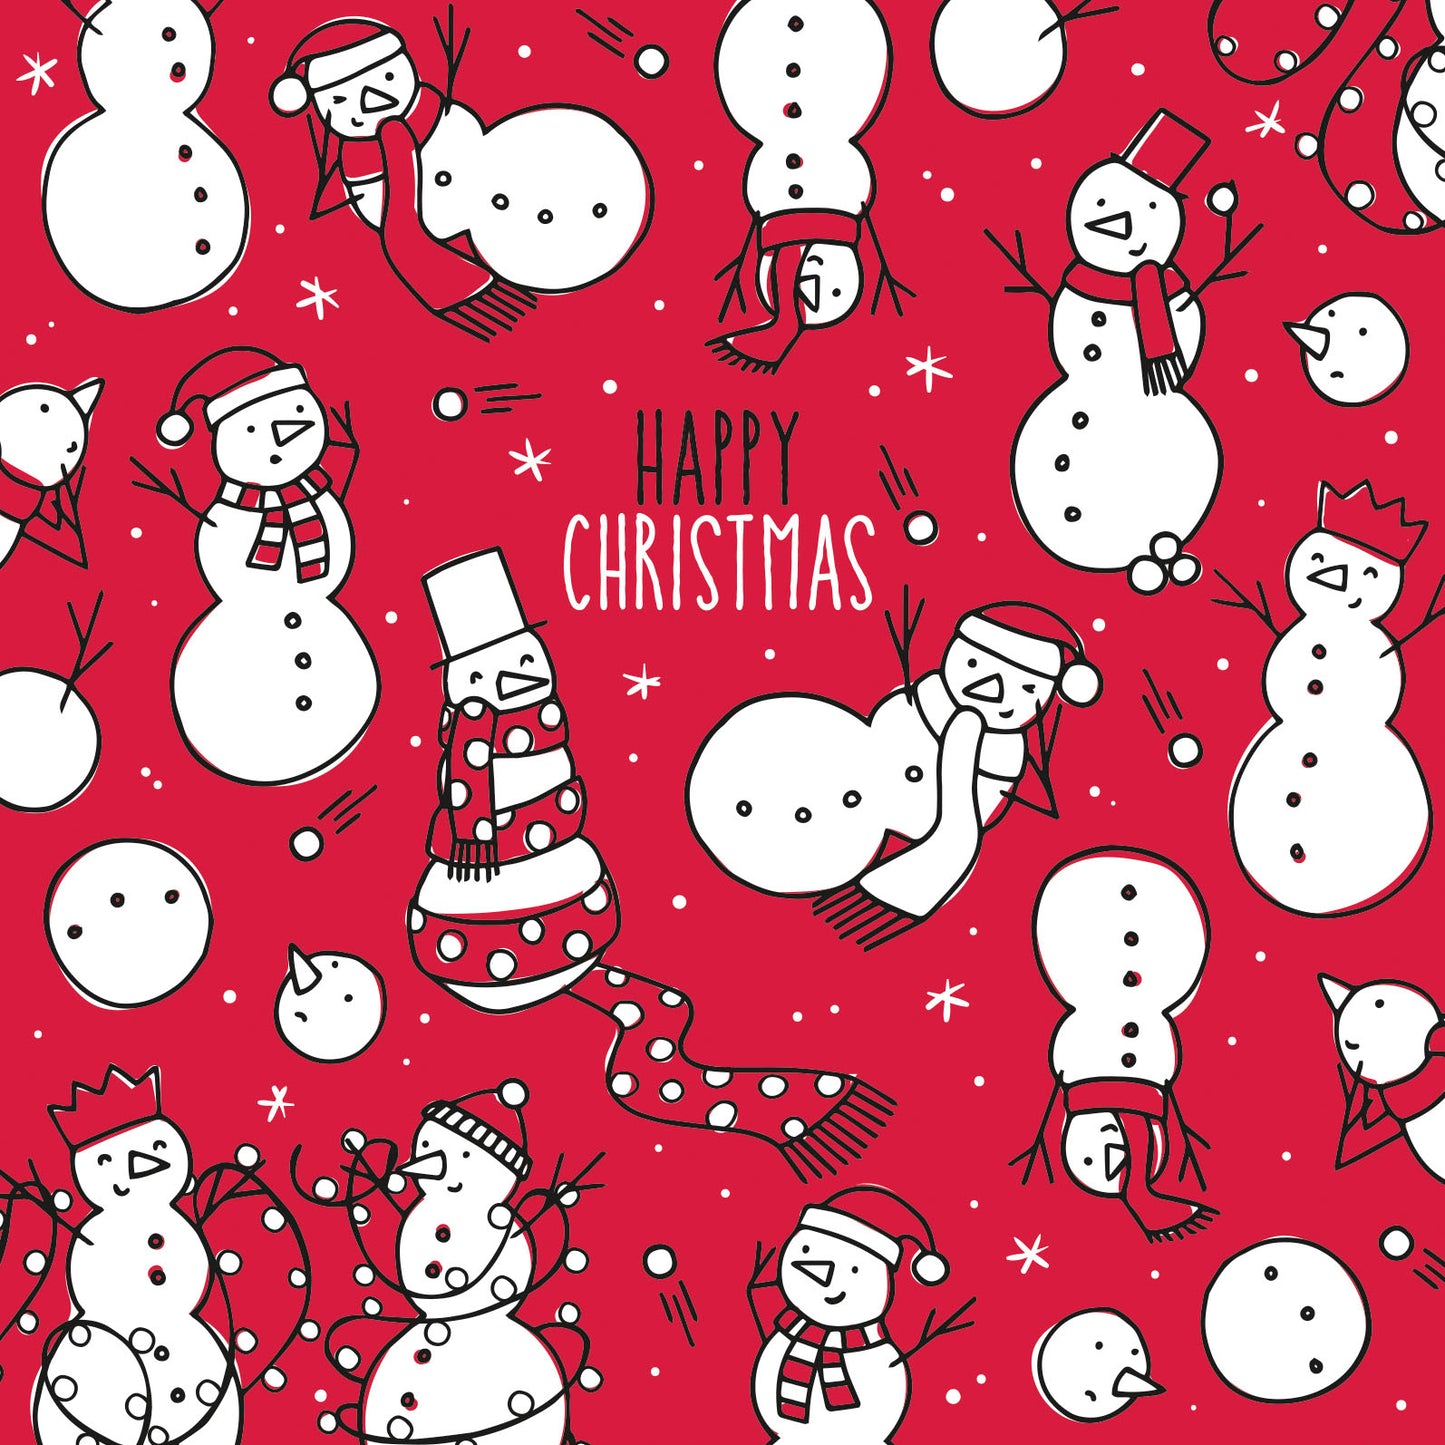 Pack of 8 Snow Fun Festive Snowman NSPCC Charity Christmas Cards